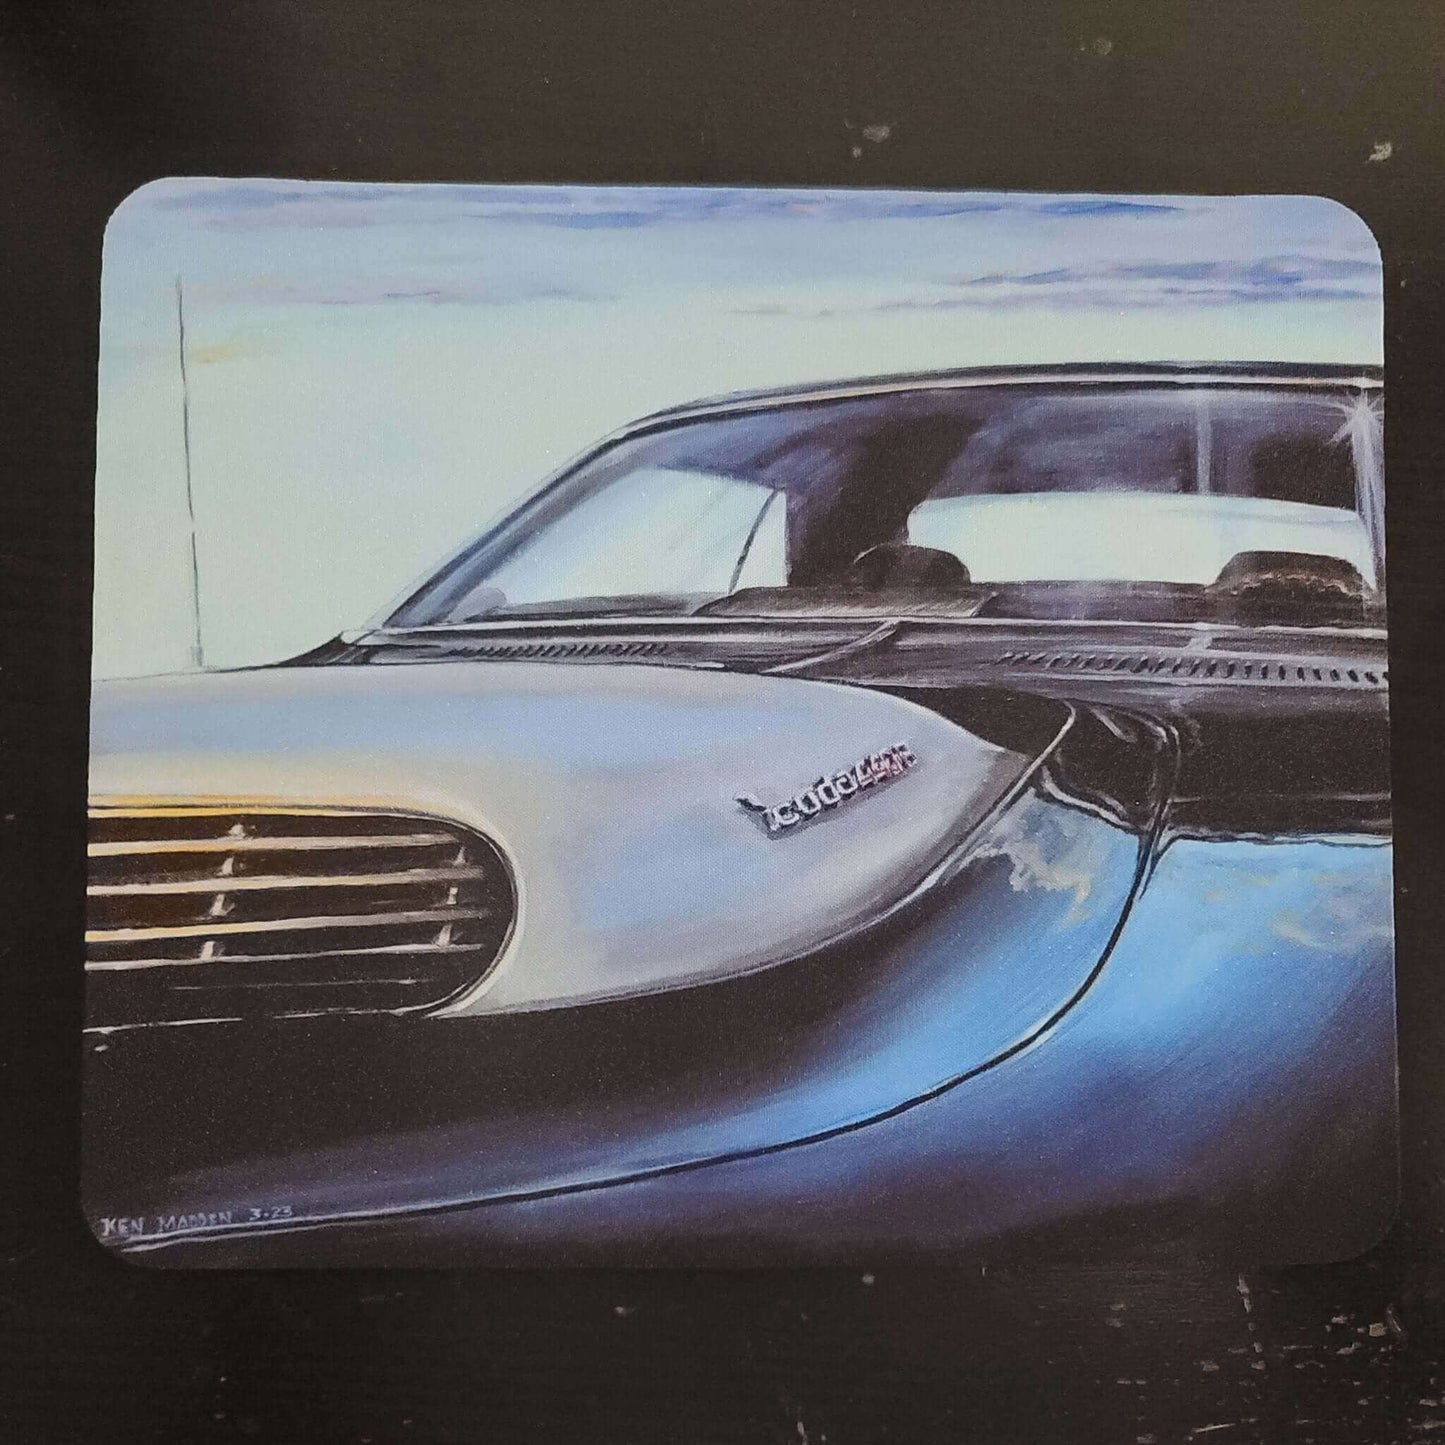 CUA 440 6 - Mouse pad 6 pack American Made american muscle CUDA 440 CUDA 440 6 pack made in america muscle car plymouth six pack